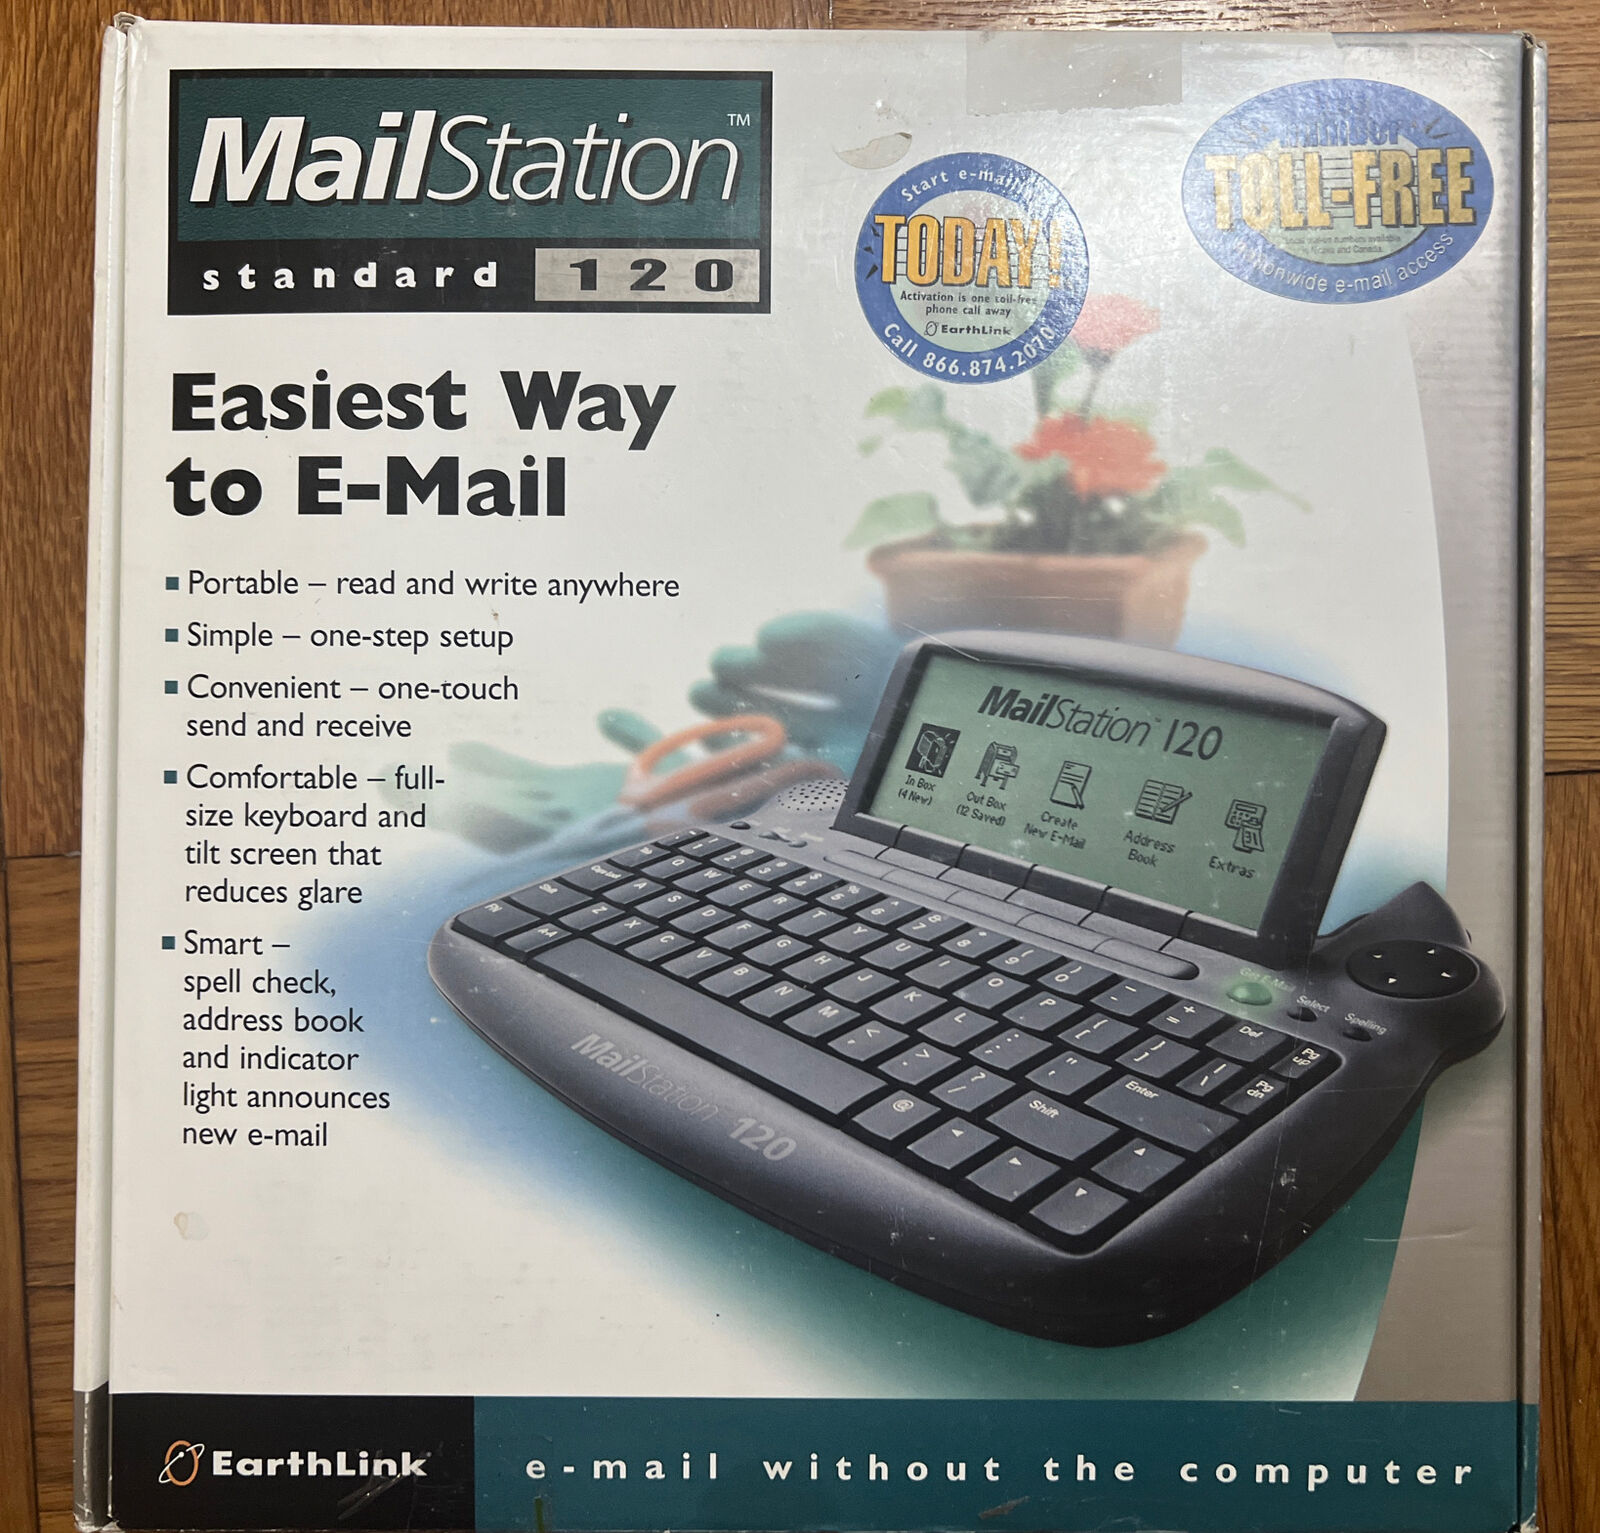 Earthlink Mail Station standard 150-retro tech-email-vintage technology